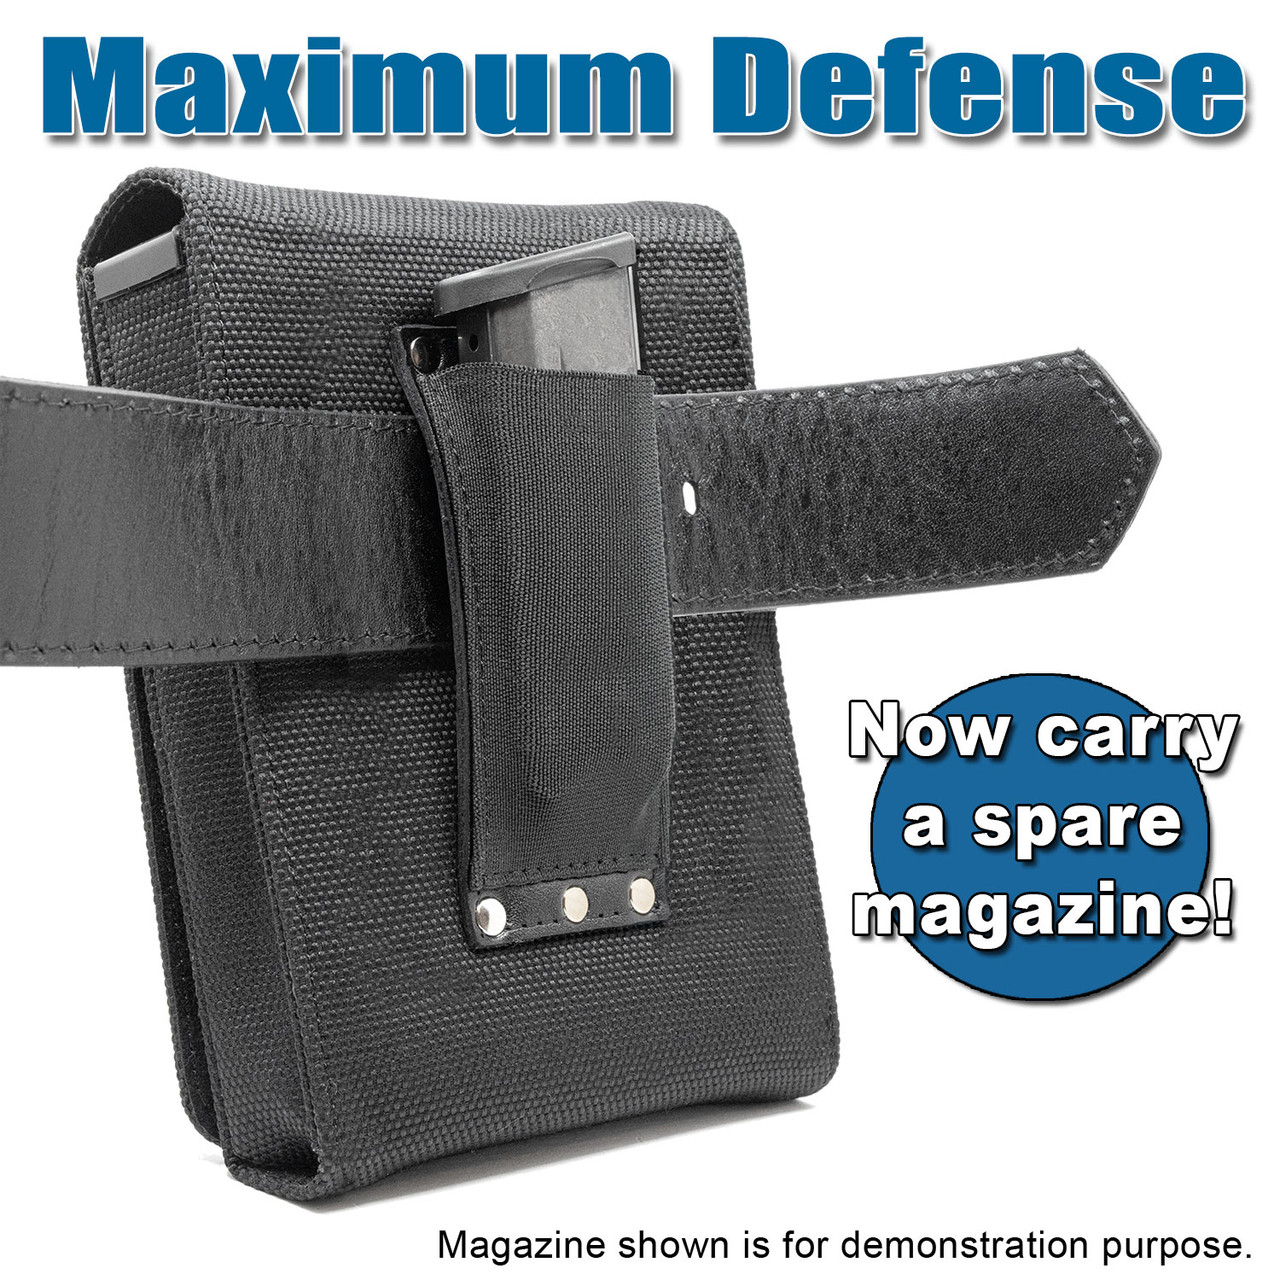 The Kahr CW45 Max Defense Holster